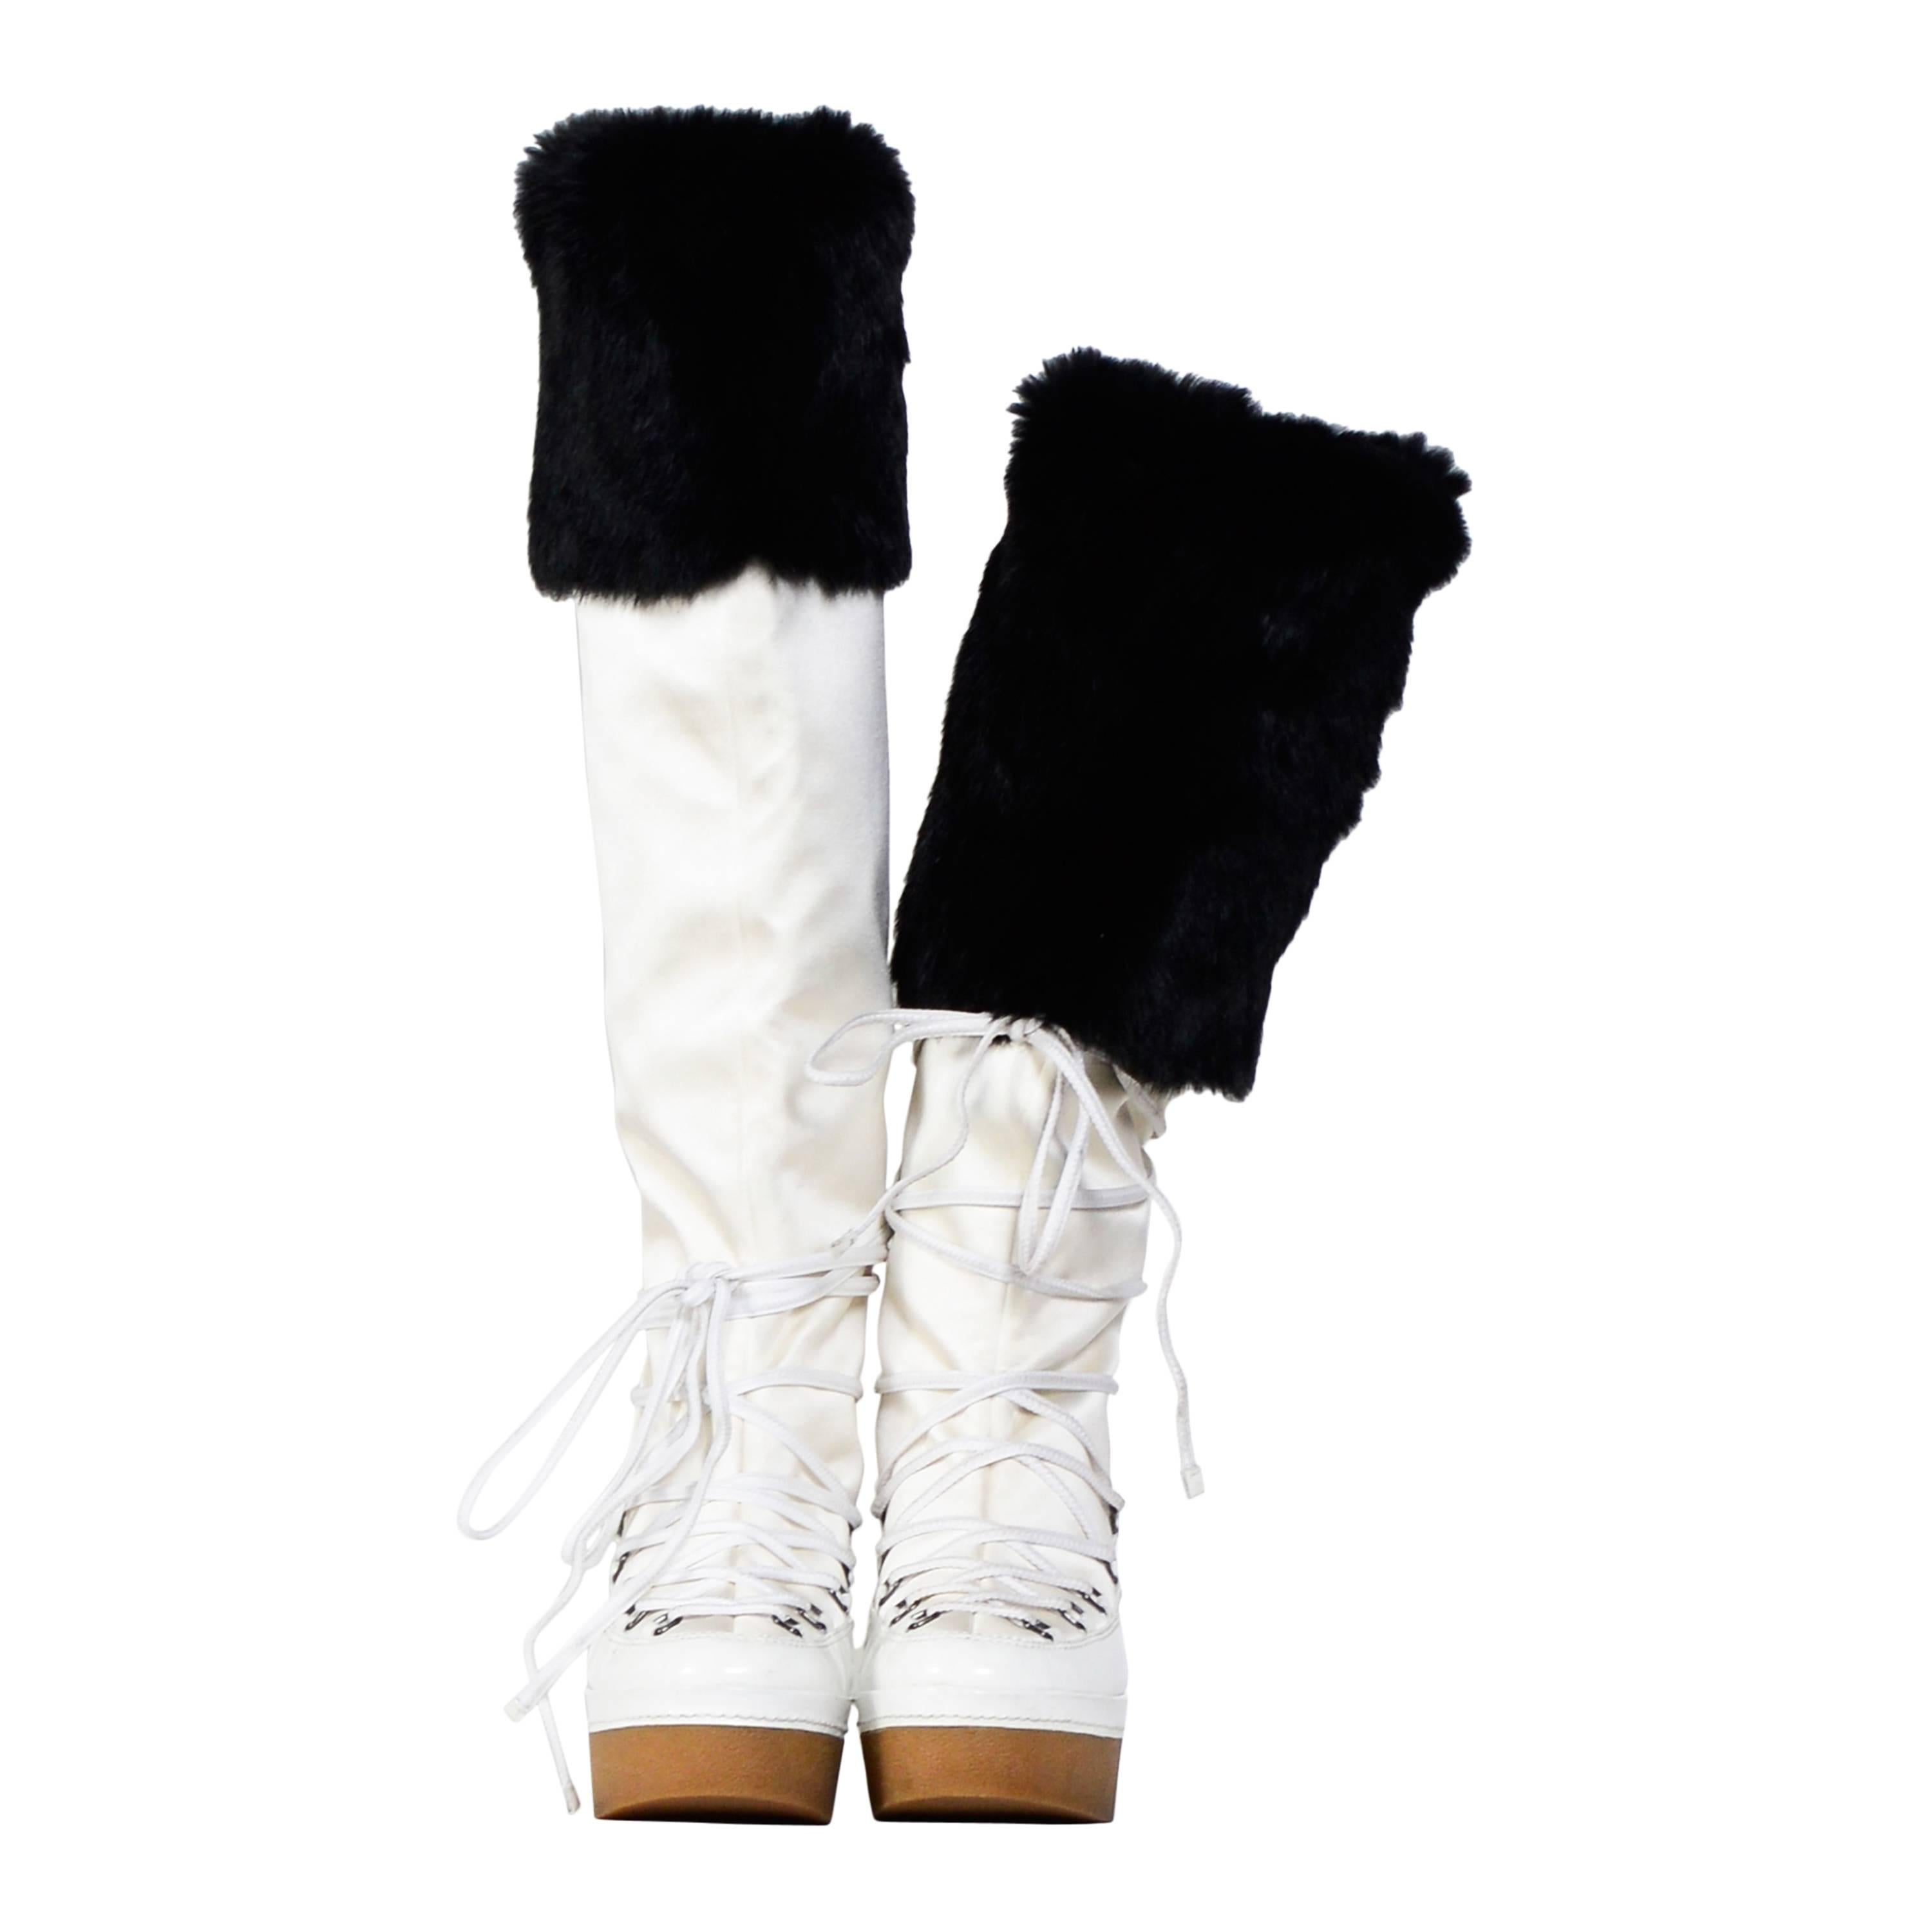 GIVENCHY / Alexander McQueen White & Black Snow-Boots